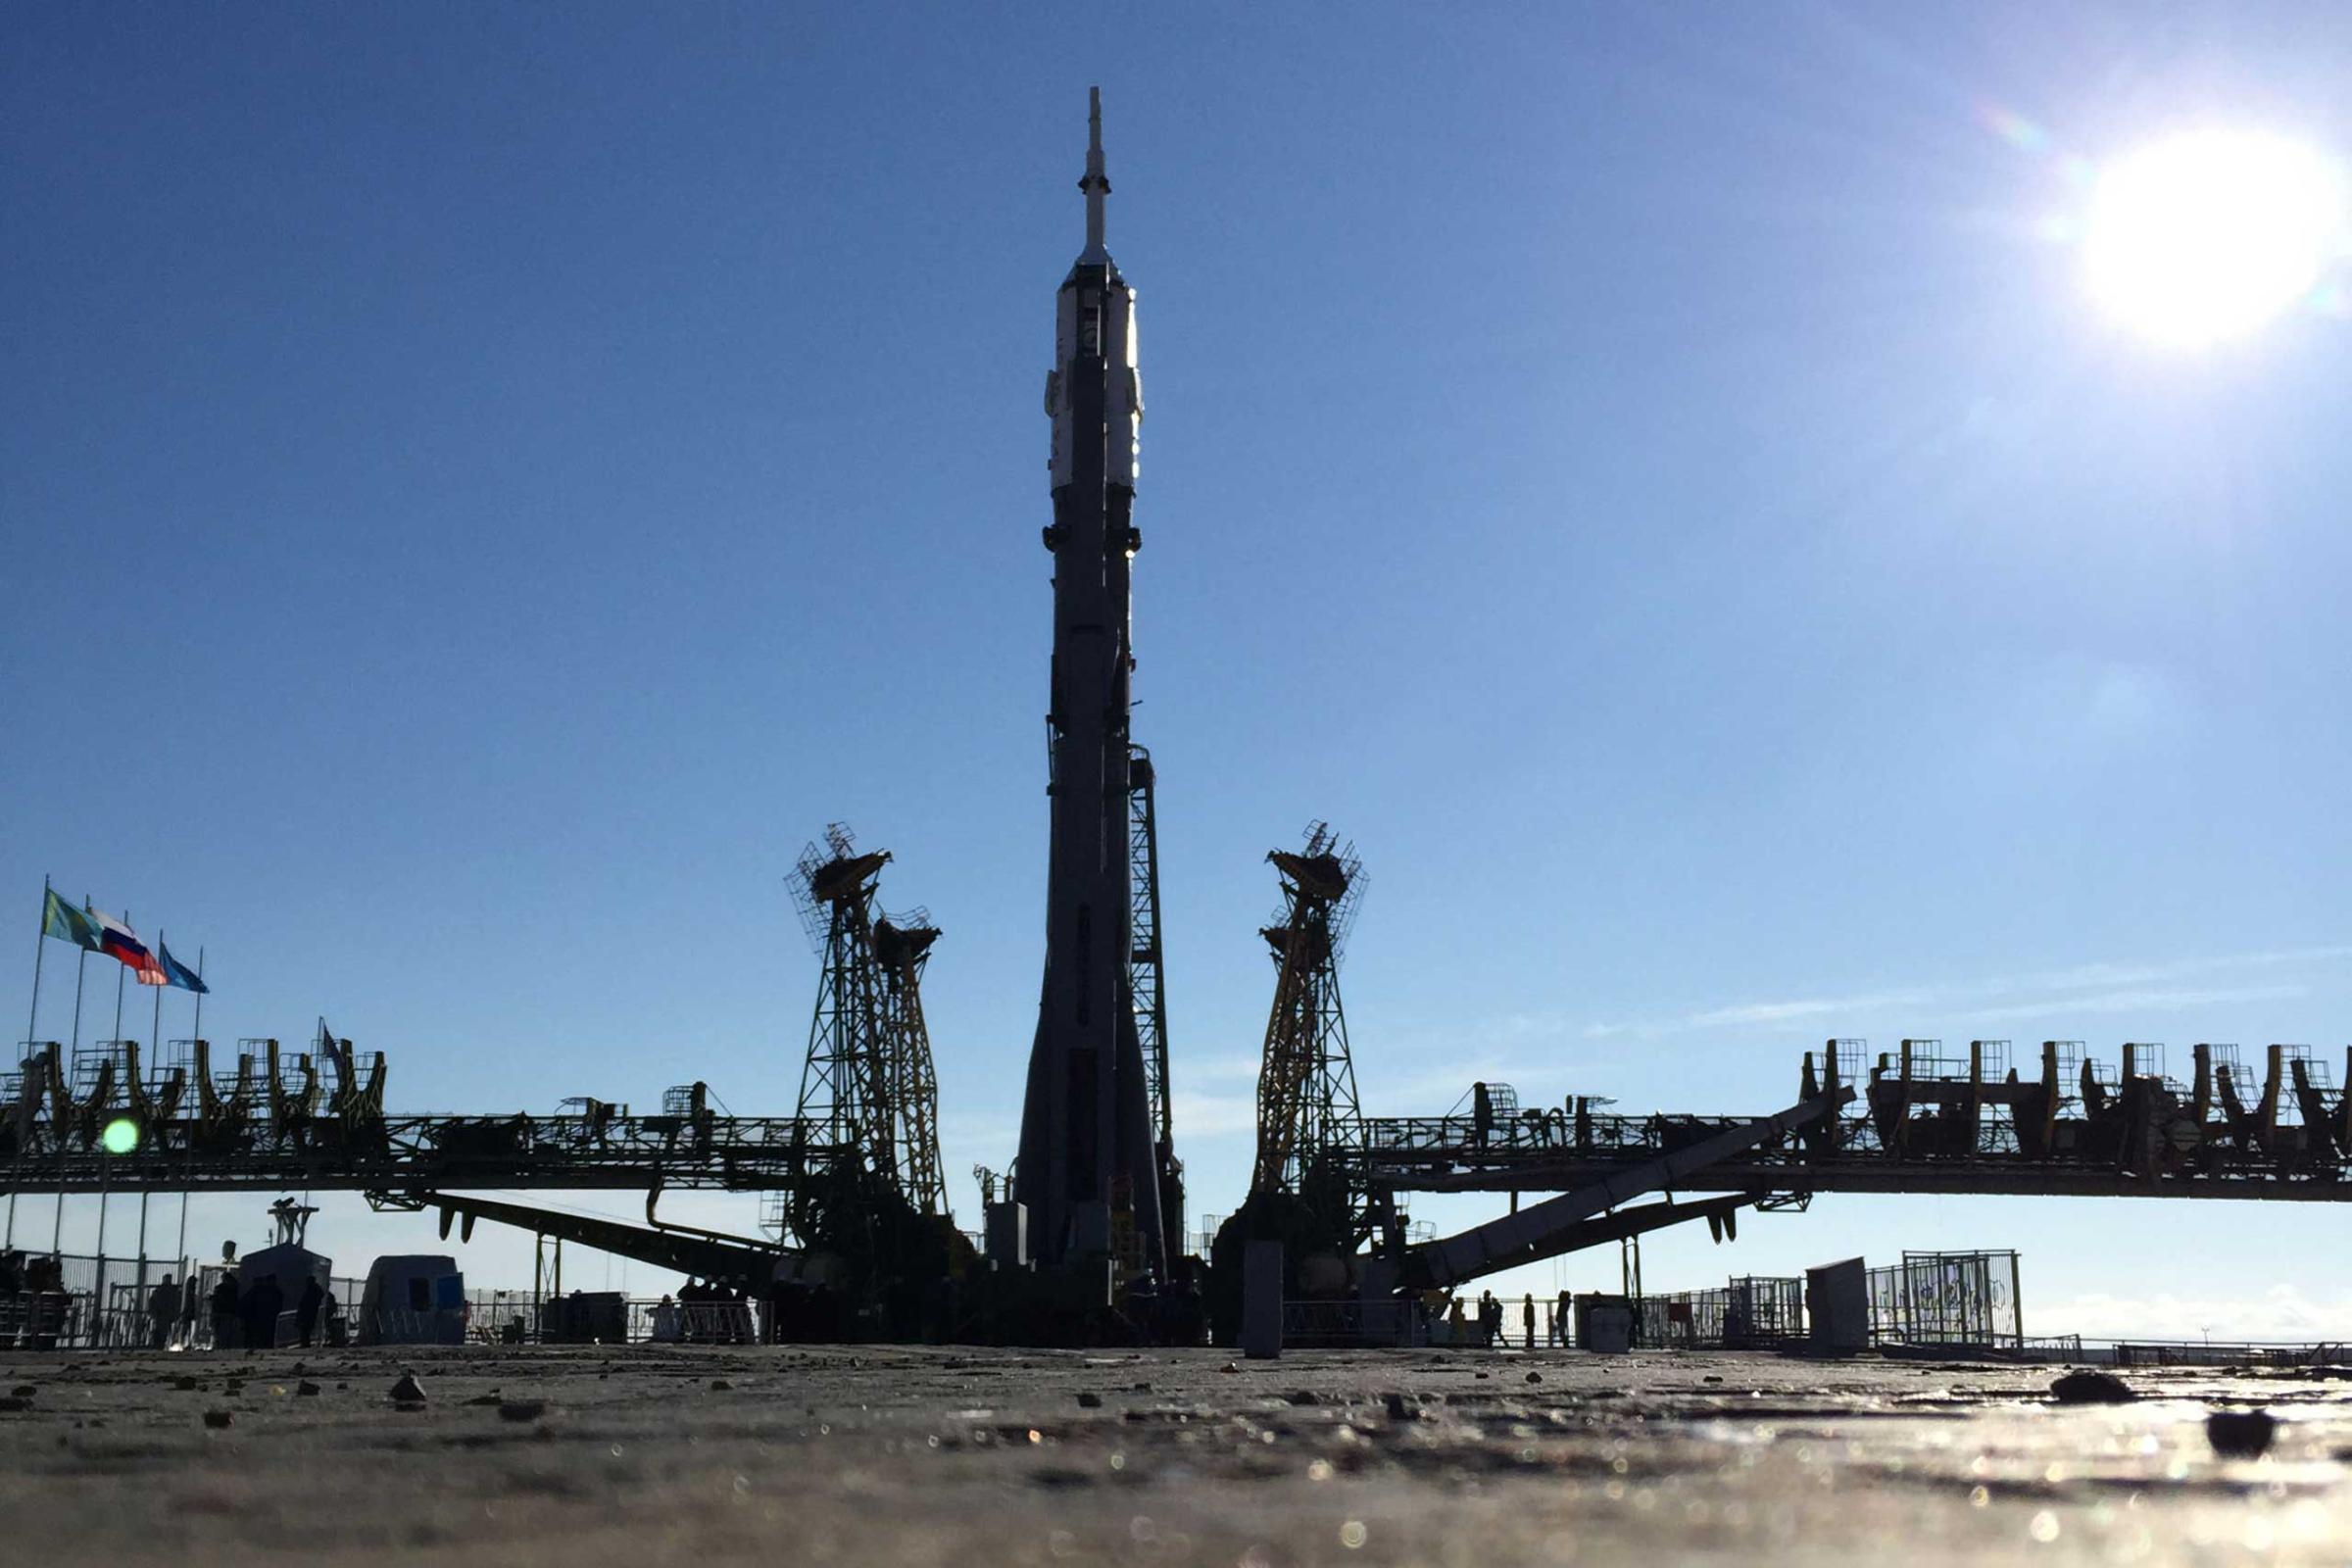 The Soyuz stands upright after being raised at the Baikonur Cosmodrome in Kazakhstan on Wednesday, March 25. The rocket will launch Friday, beginning a yearlong stay aboard the ISS by Scott Kelly and Mikhail Kornienko.